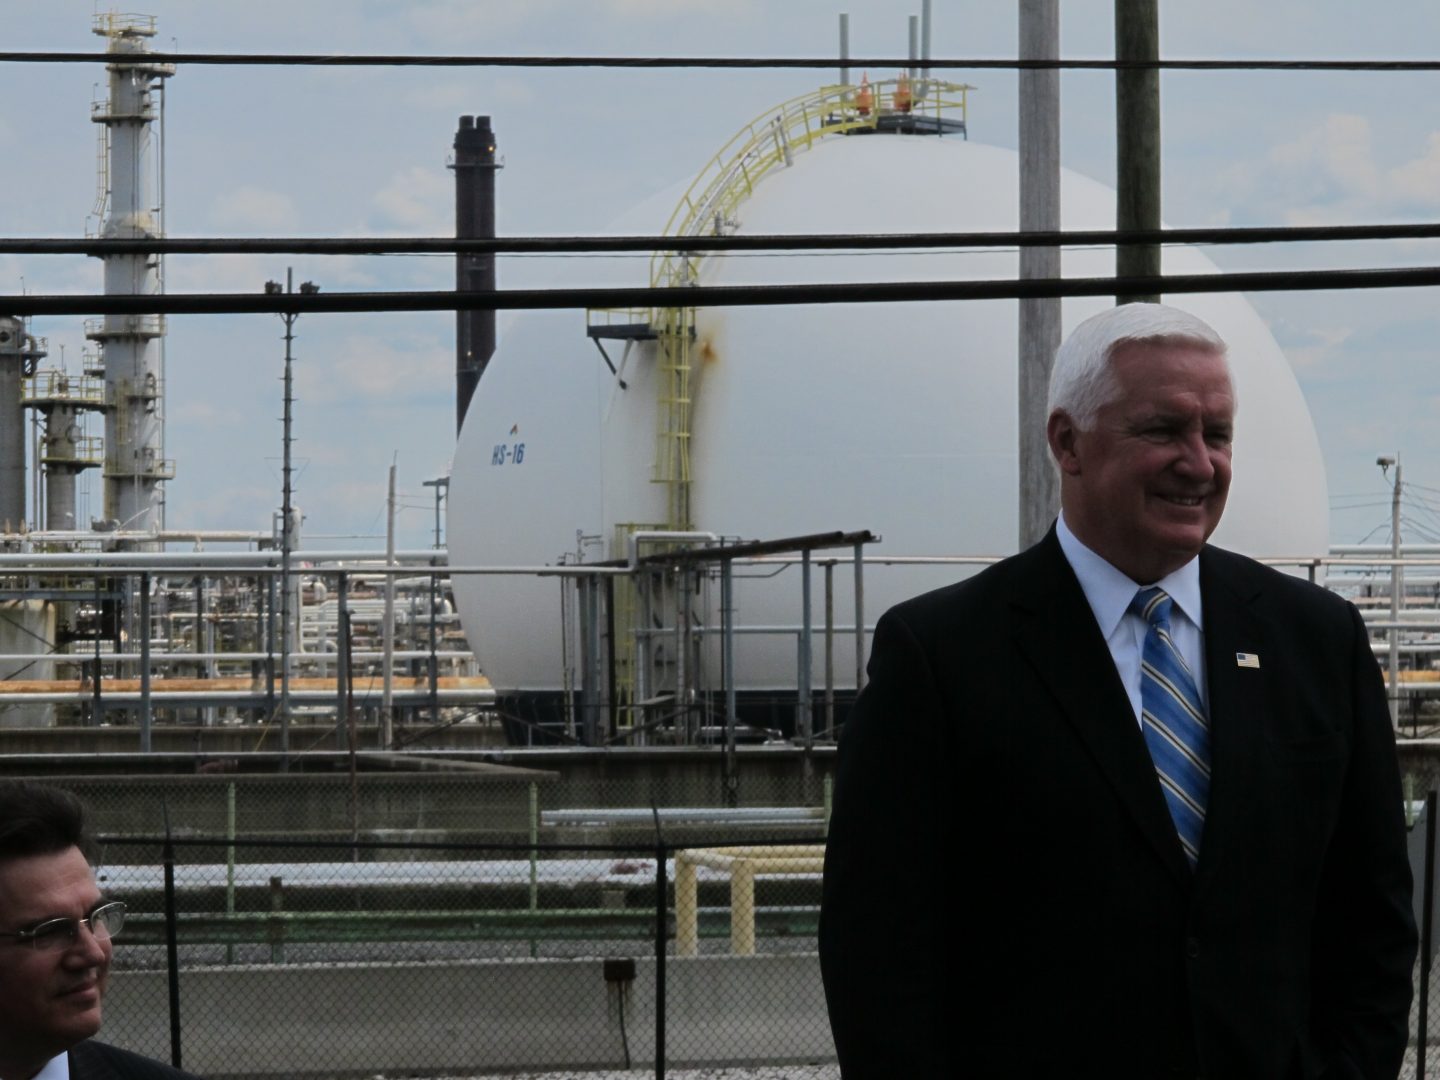 Gov. Tom Corbett stands in front of the shuttered Sunoco refinery in Marcus Hook, Delaware County.